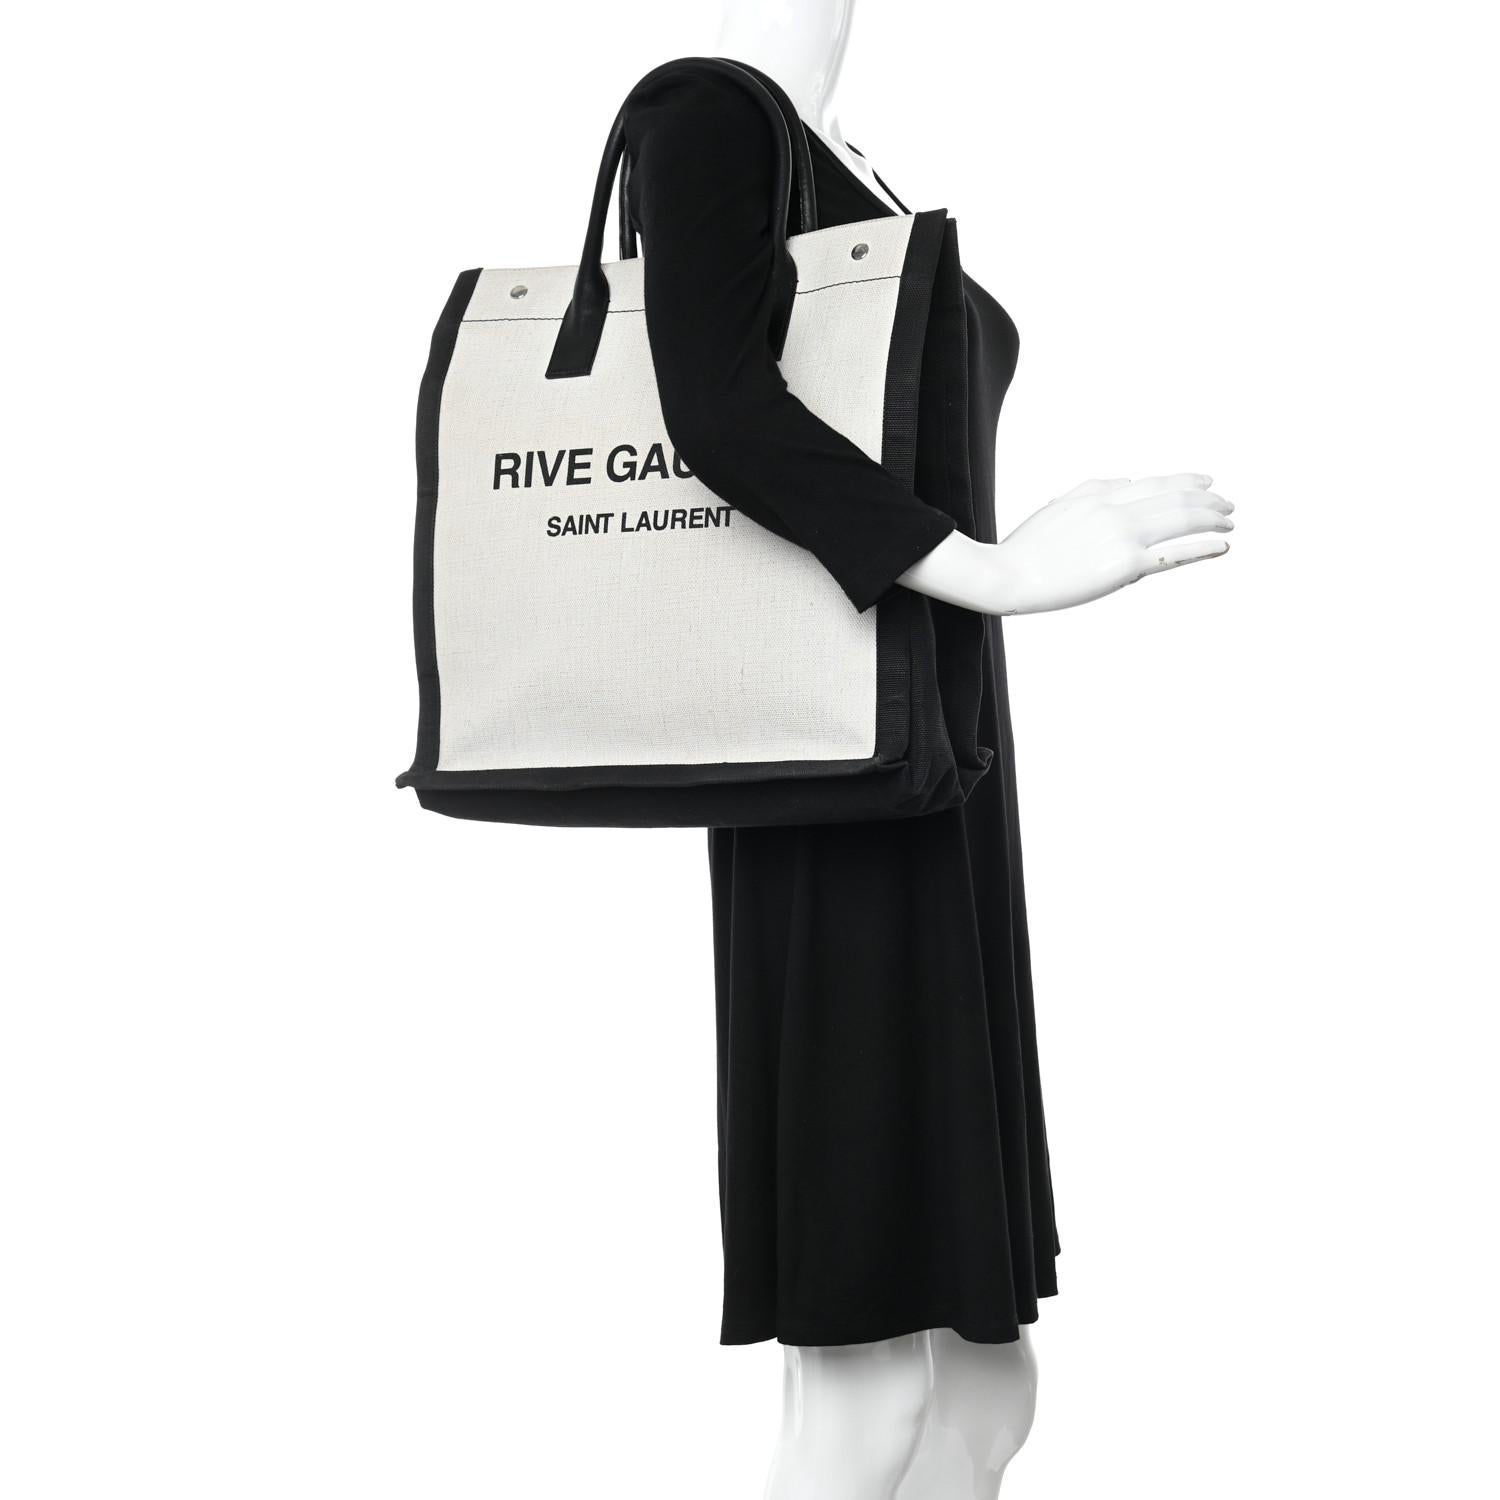 This tote is made of off white linen with 